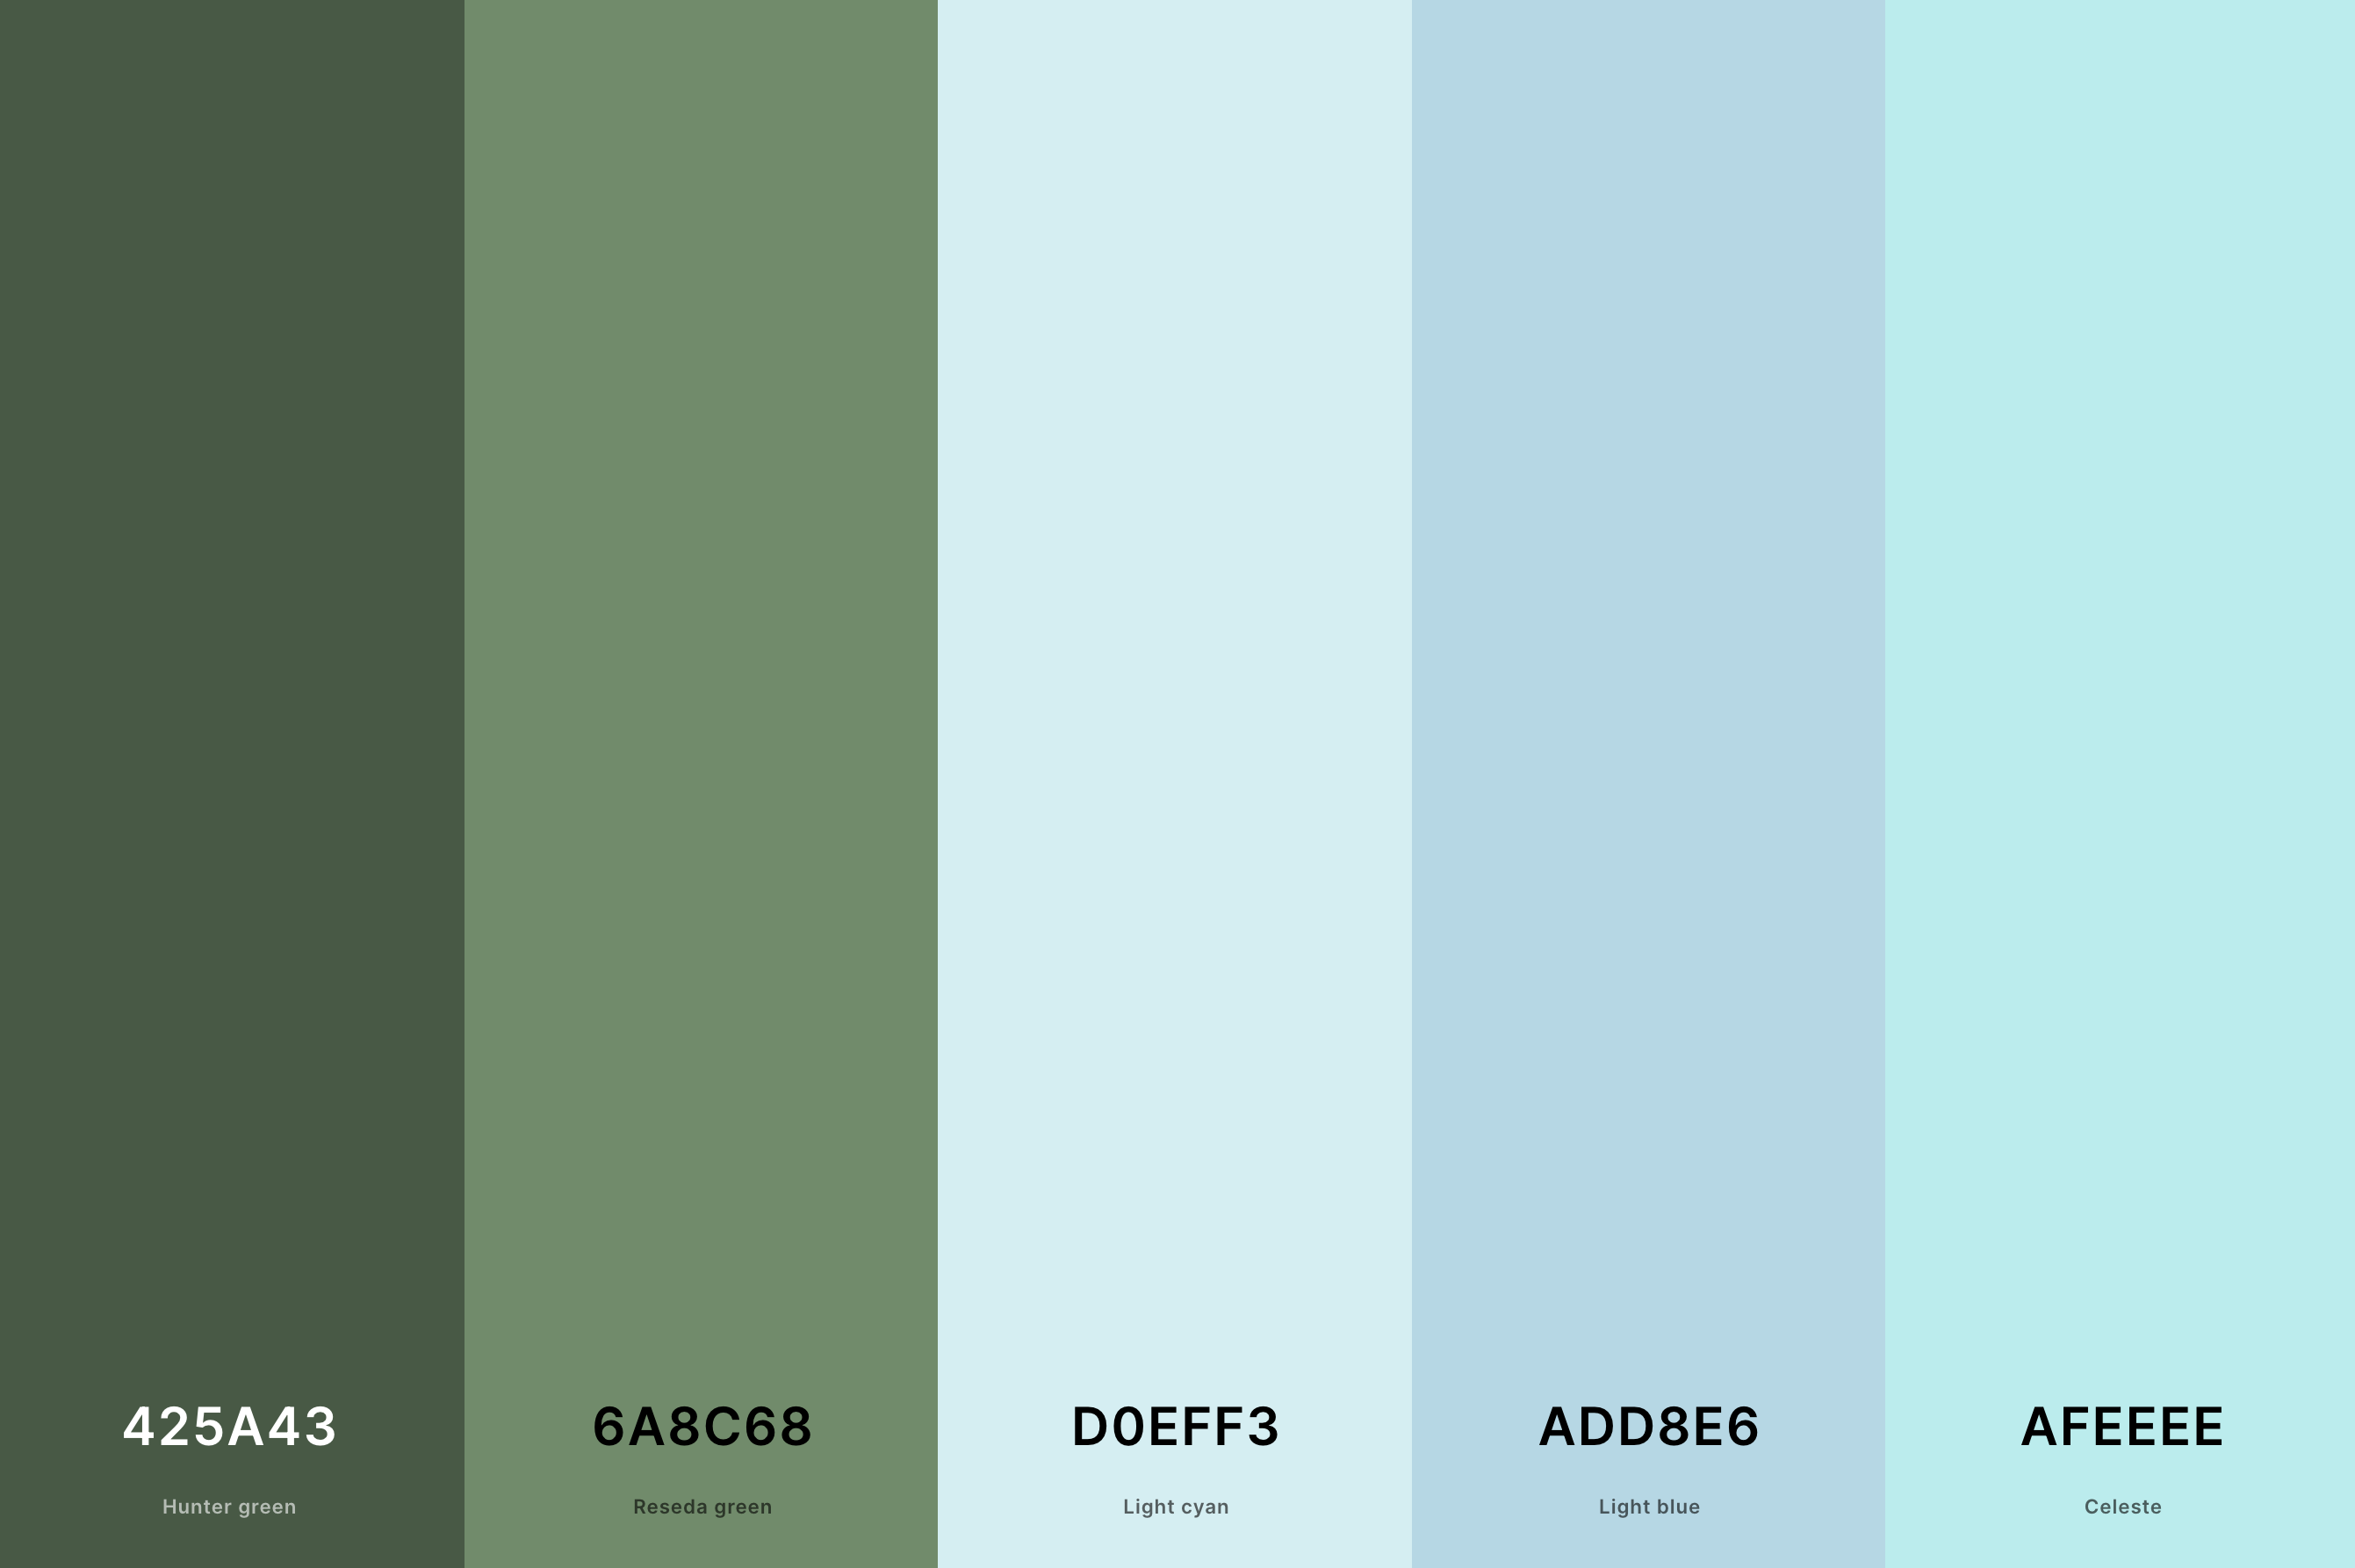 23. Color Palette With Pale Blue And Sage Green Color Palette with Hunter Green (Hex #425A43) + Reseda Green (Hex #6A8C68) + Light Cyan (Hex #D0EFF3) + Light Blue (Hex #ADD8E6) + Celeste (Hex #AFEEEE) Color Palette with Hex Codes